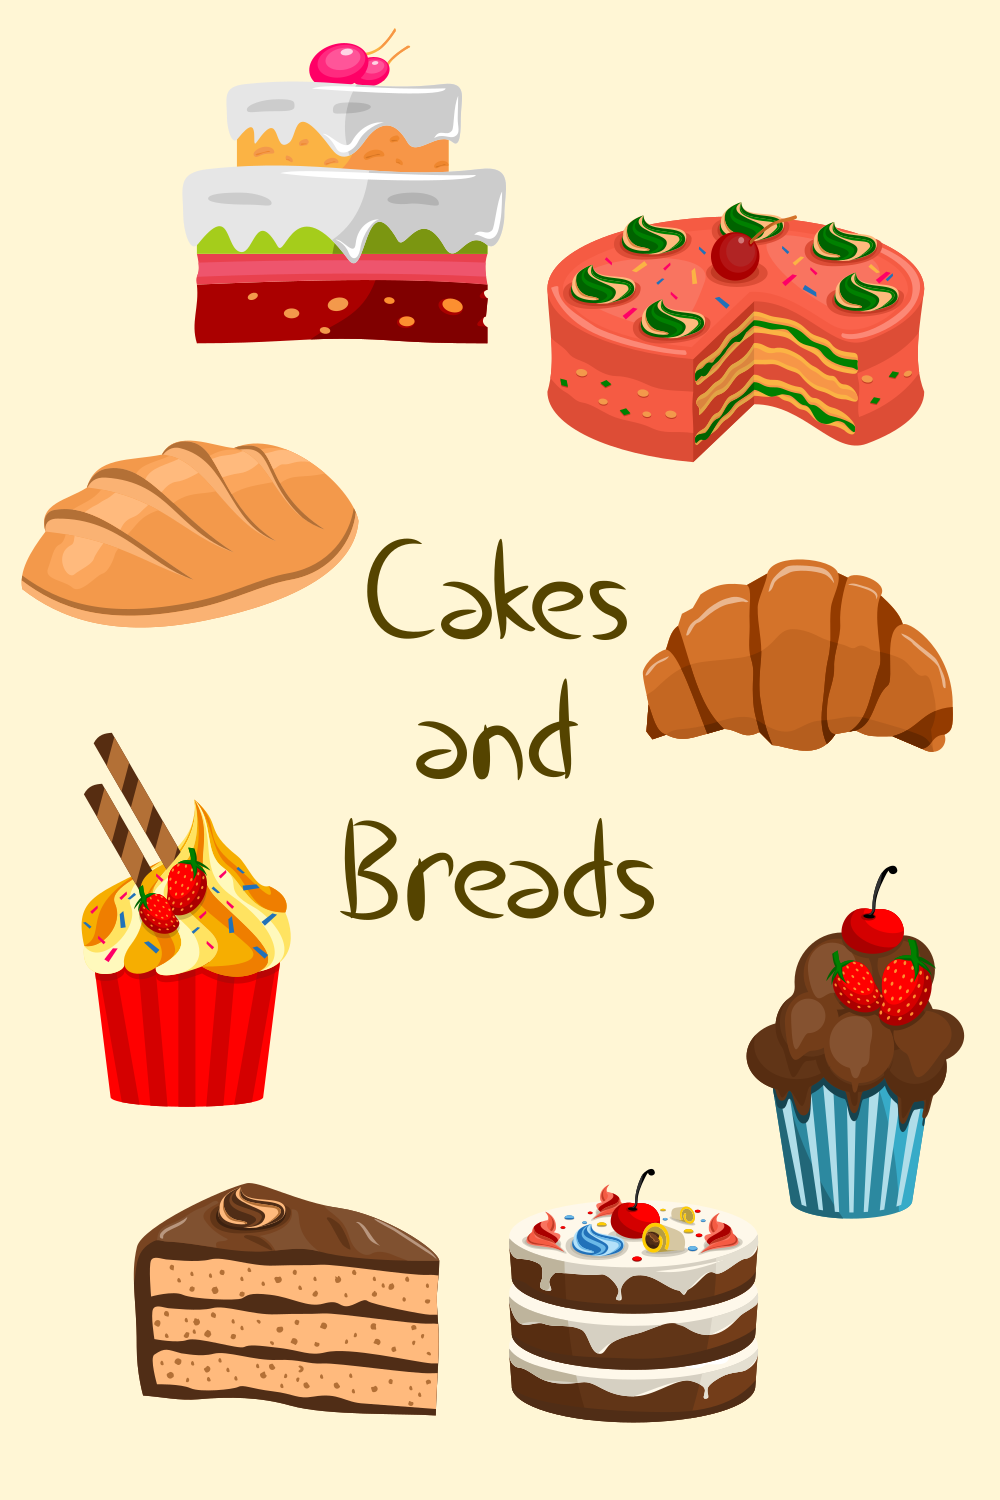 Breads and Cakes Vector Graphic Illustration pinterest image.